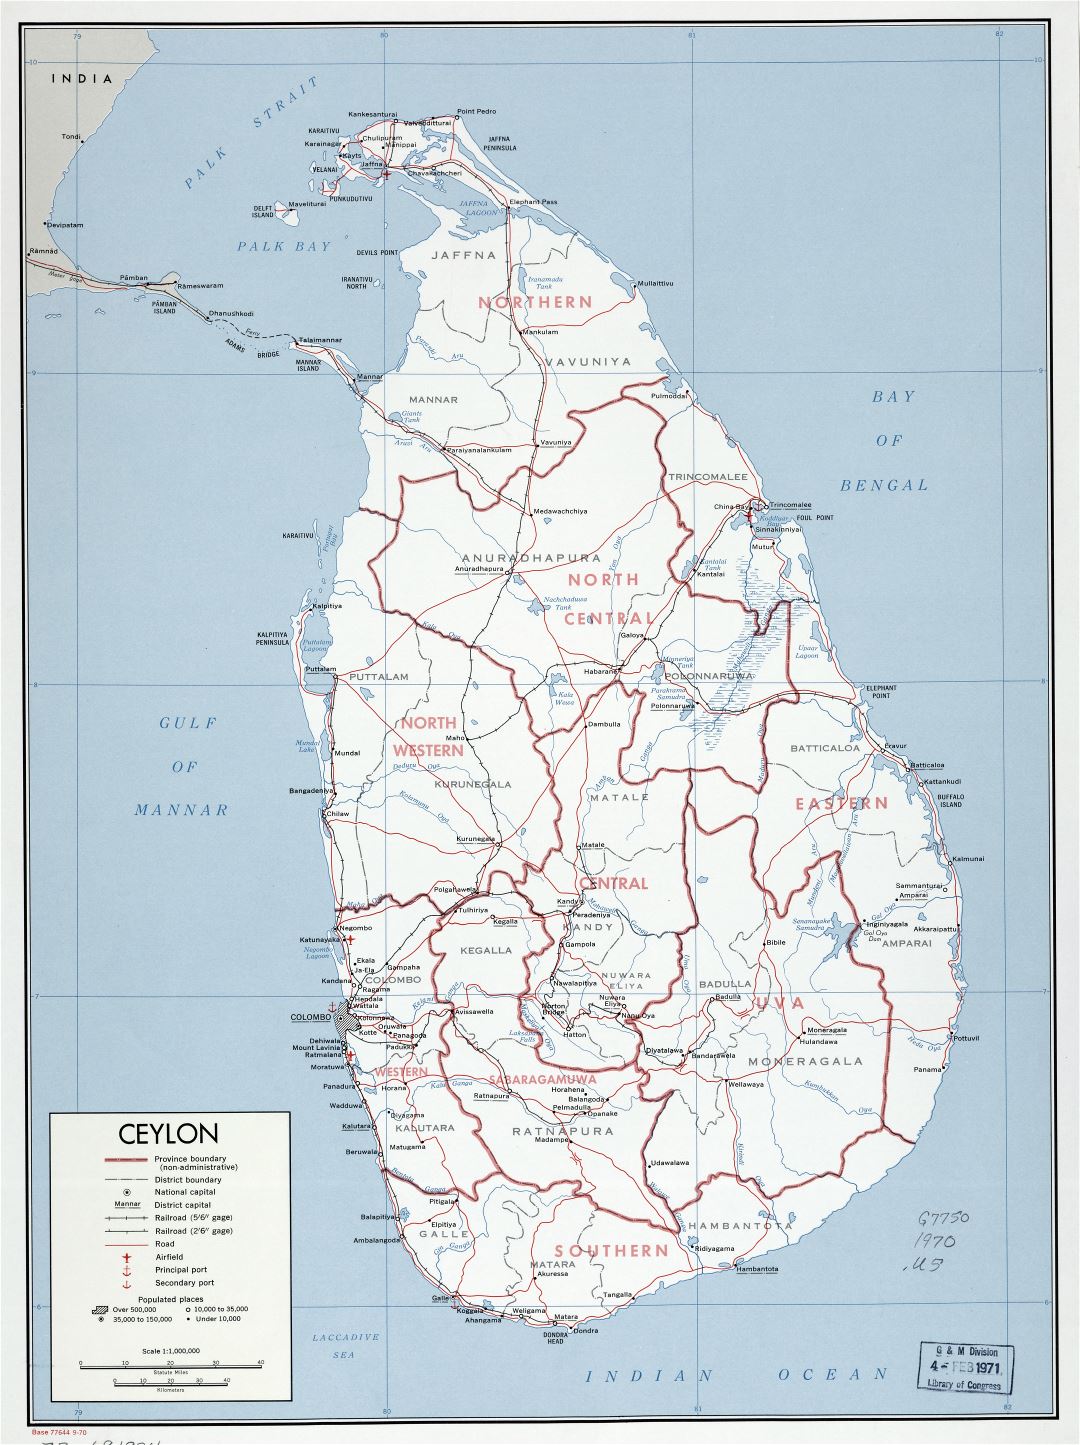 Large scale detailed political and administrative map of Sri Lanka, Ceylon with roads, railroads, ports, airports and cities - 1970